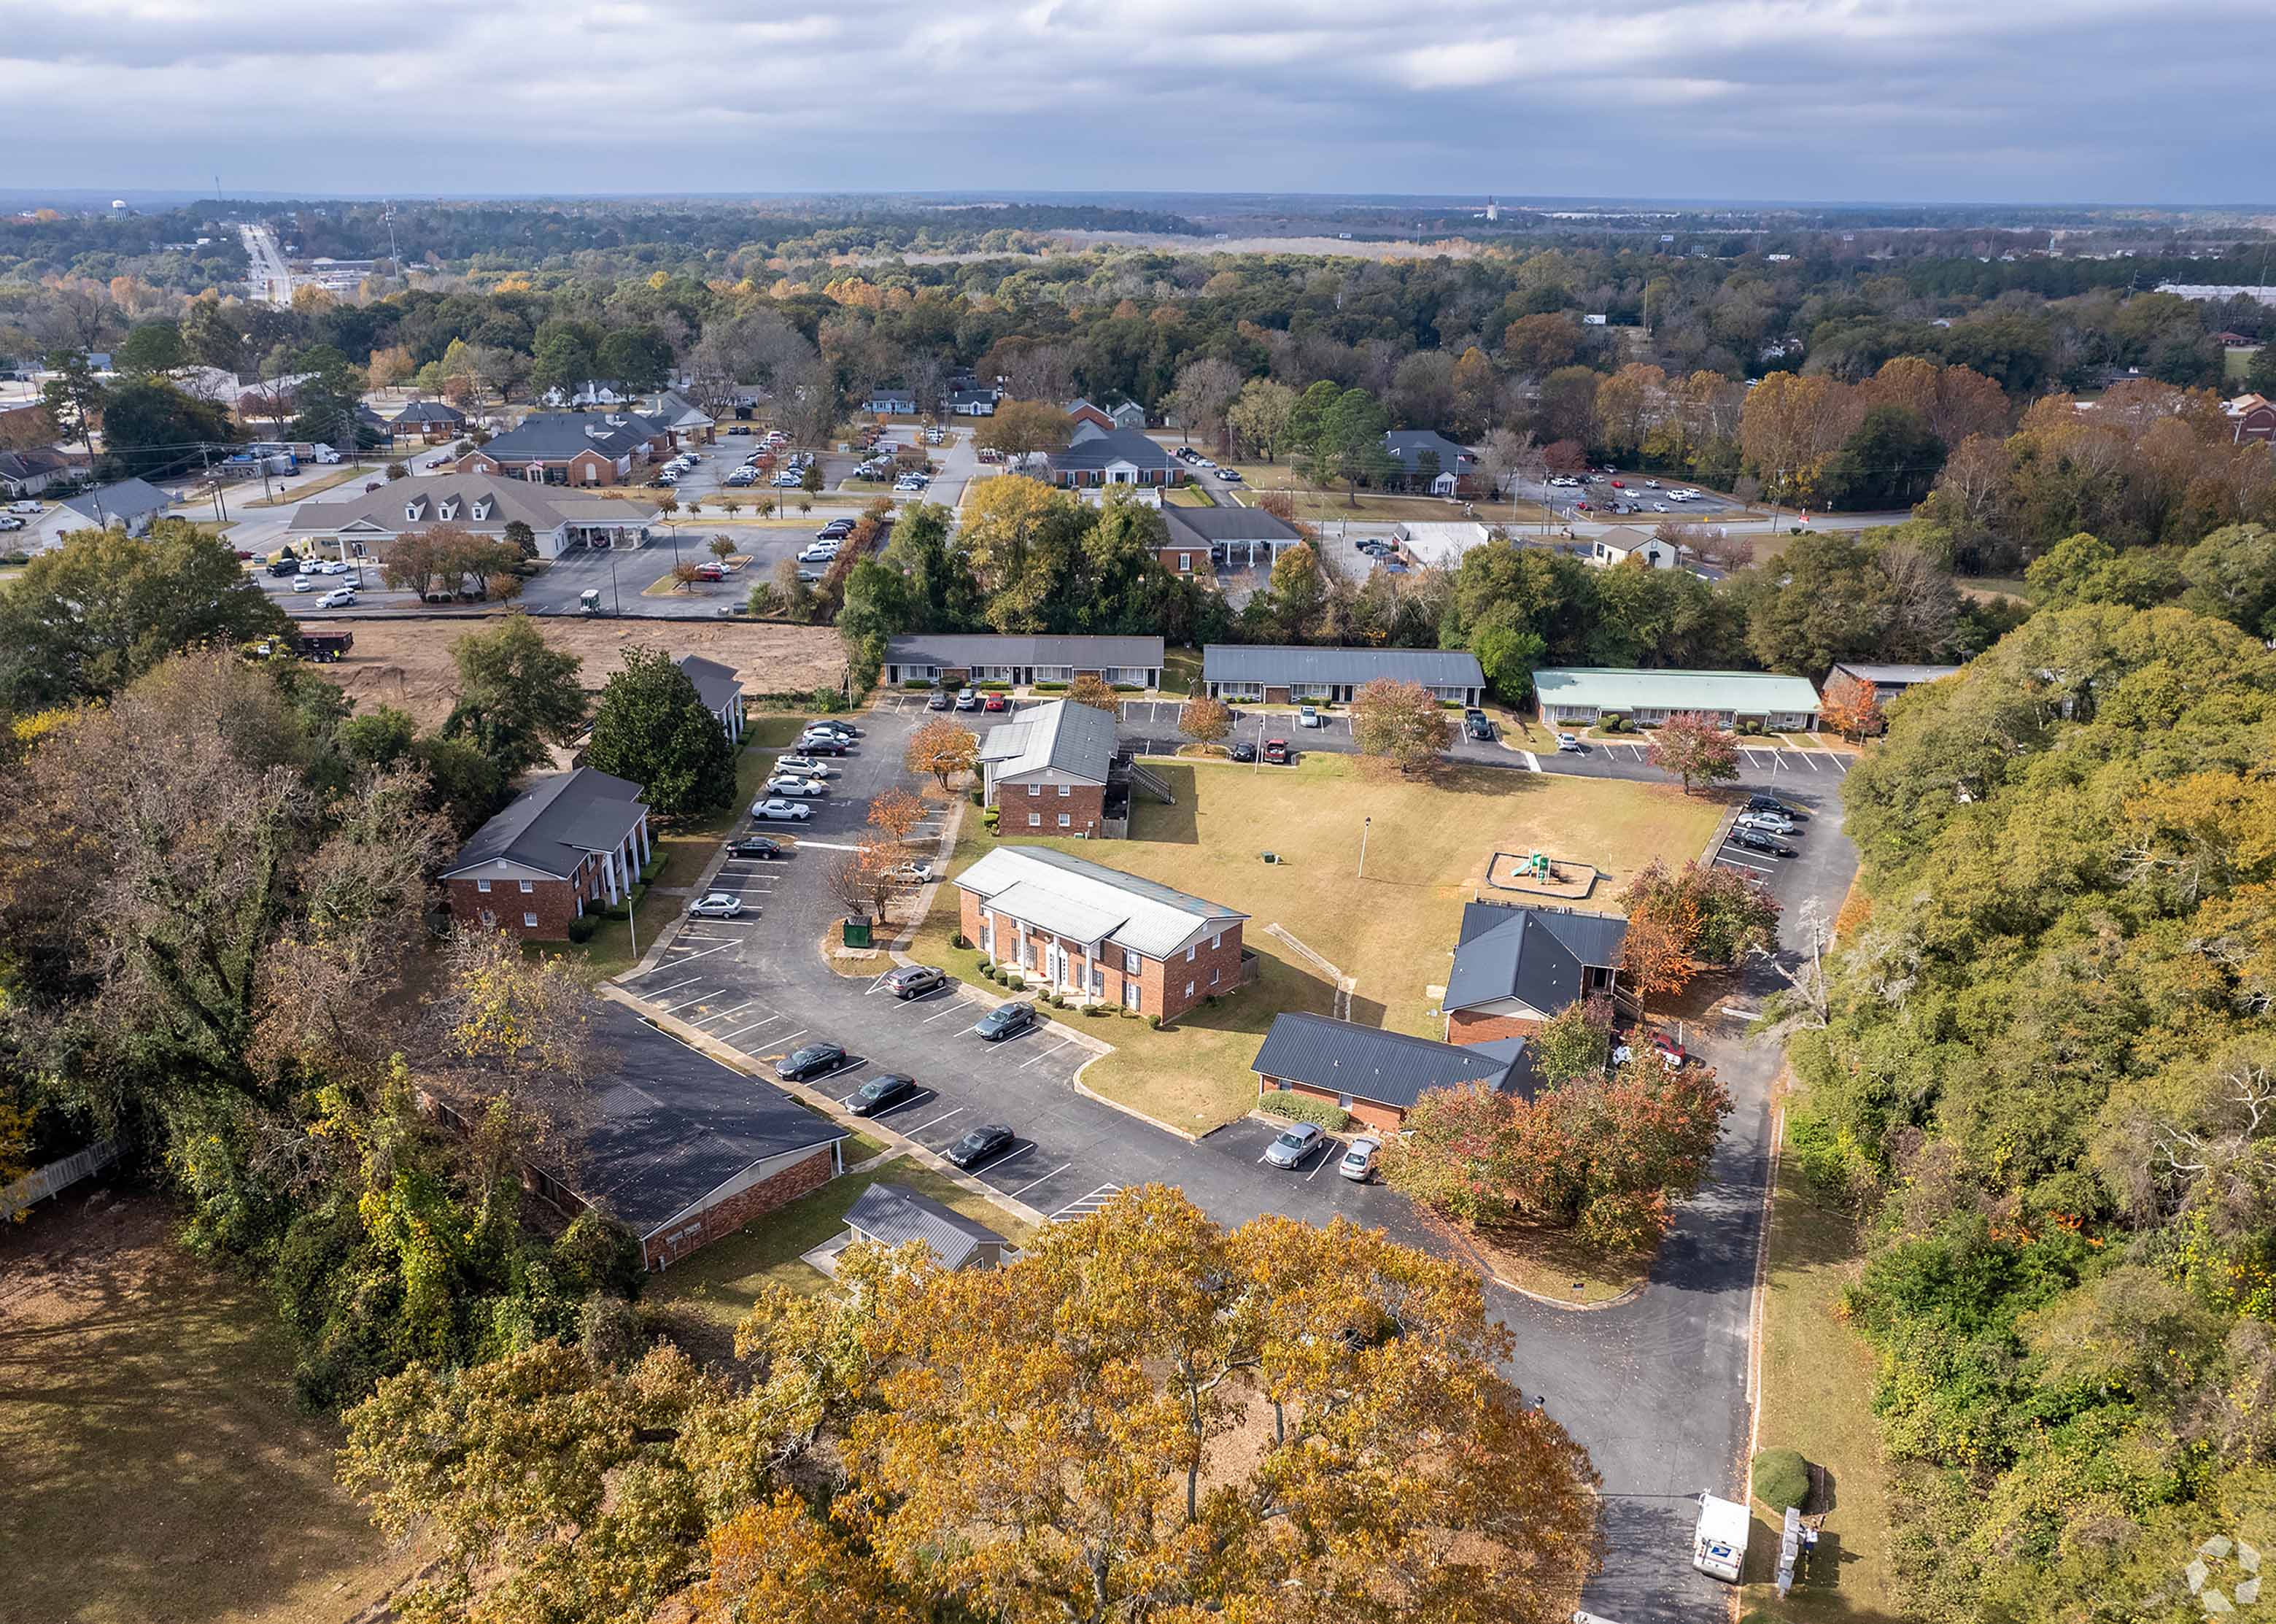 aerial view at Ashley Oaks Apartments located in Perry, GA